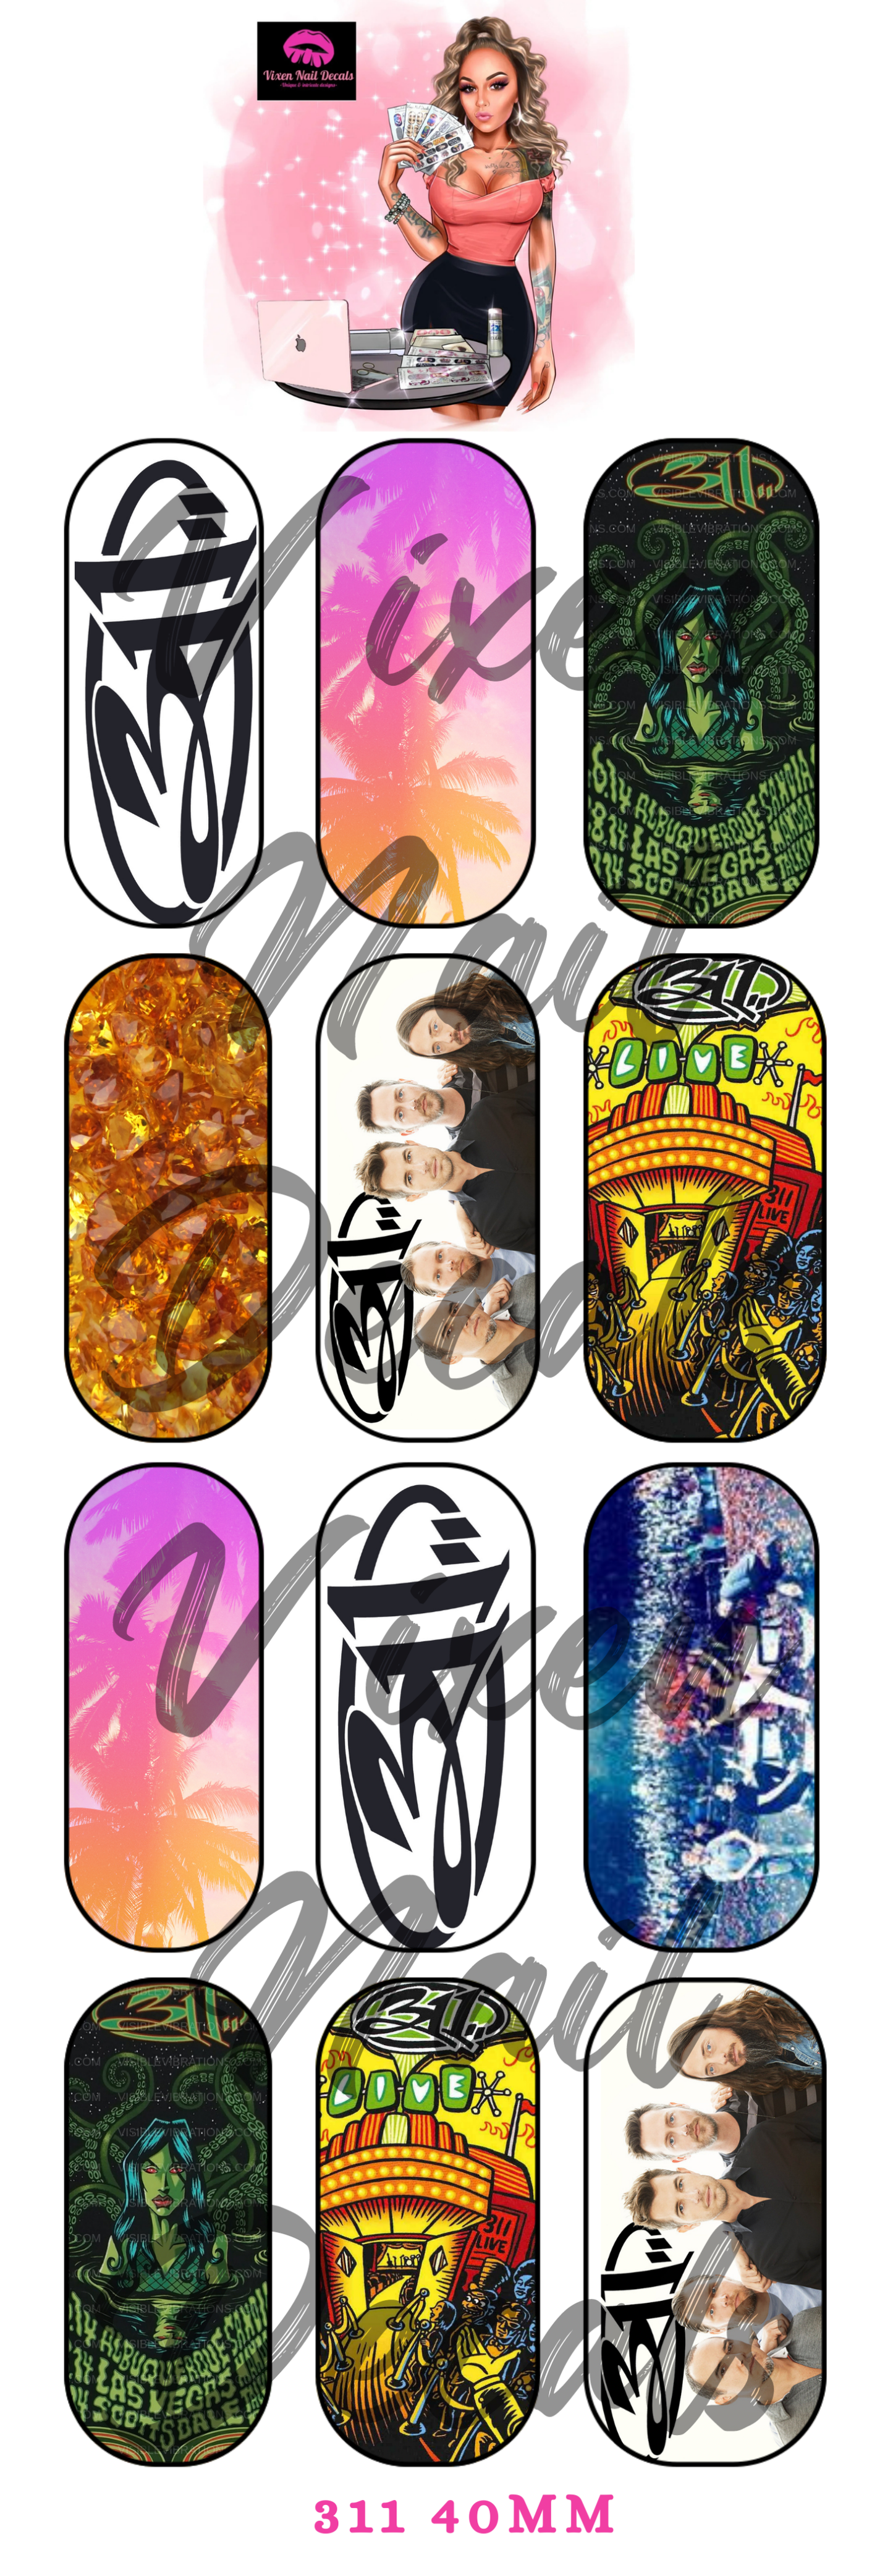 Amber Is The Color Waterslide Nail Decals - Nail Wraps - Nail Designs - Nail Art